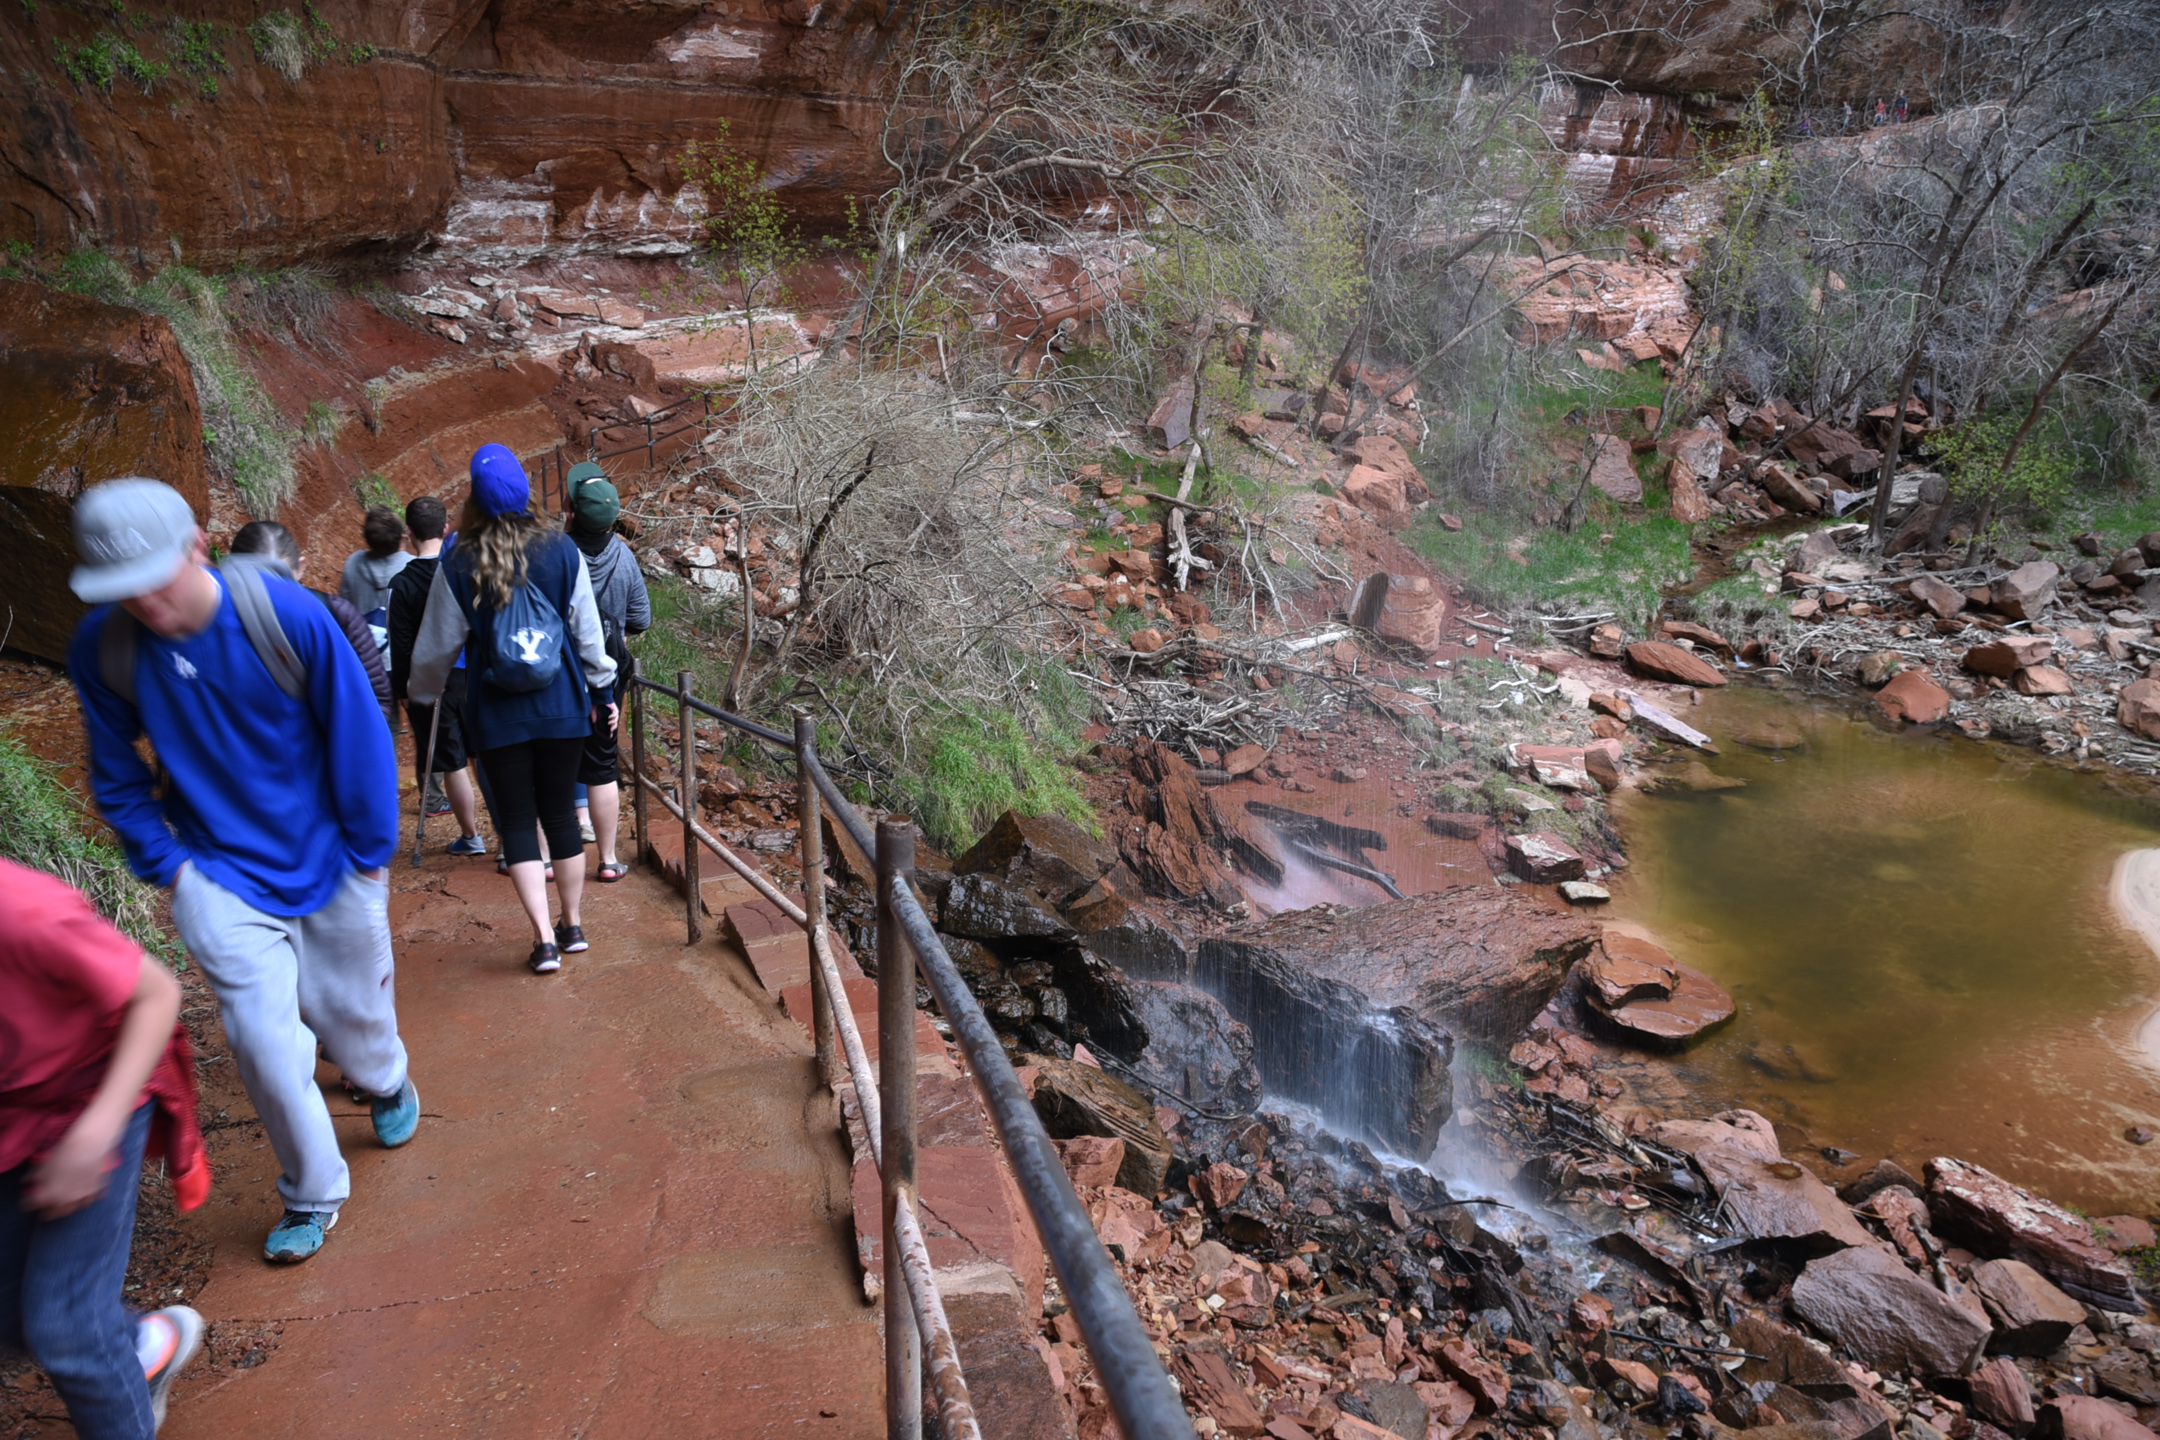 Lower Emerald Pool Trail In Zion National Park Reopens Following Landslide St George News